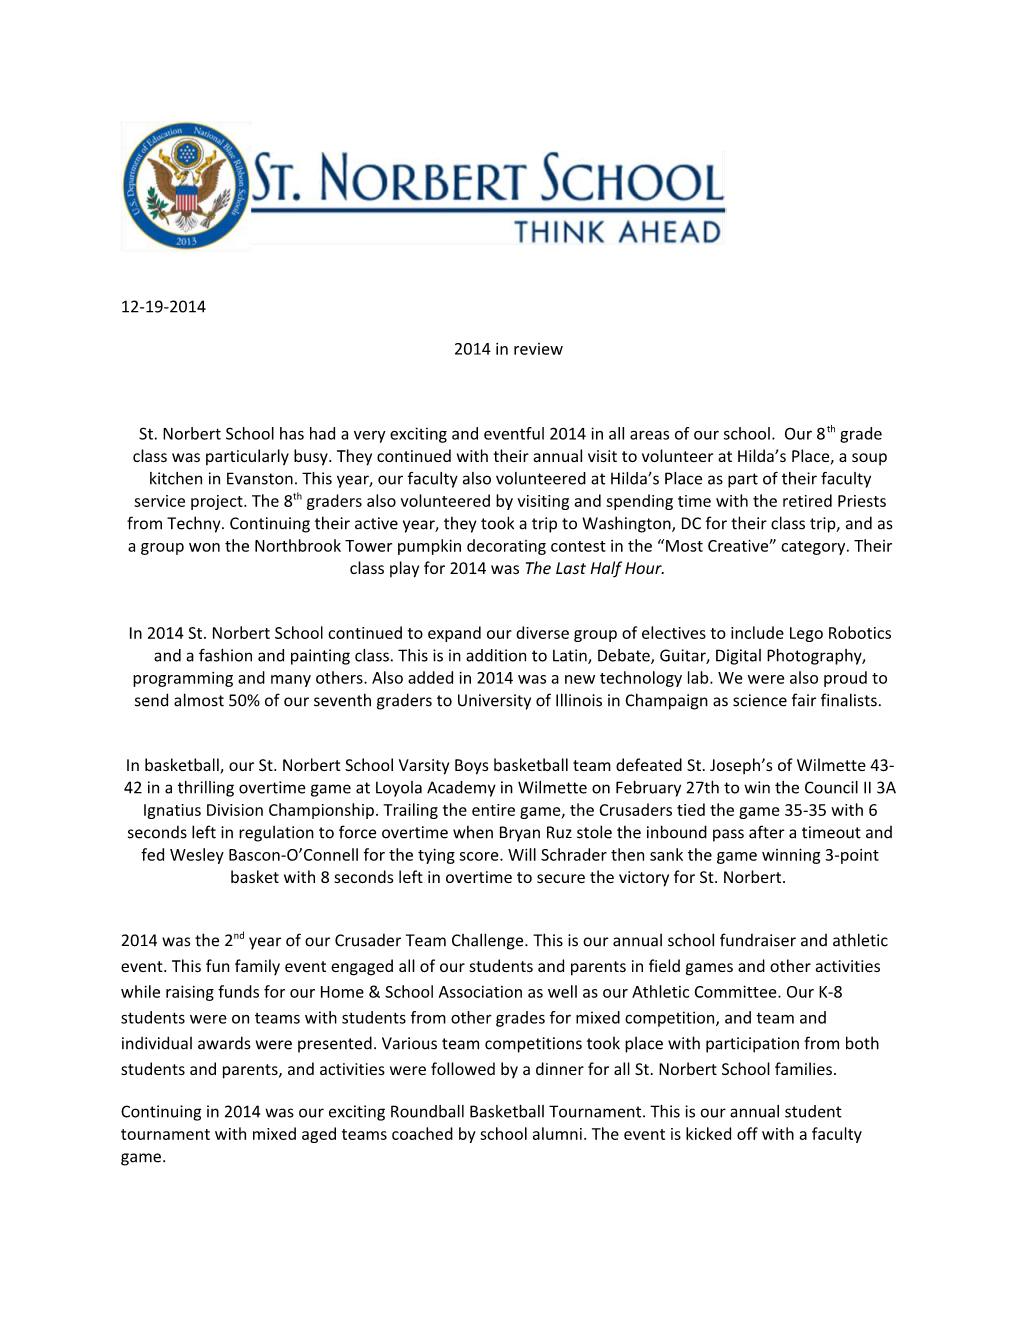 In 2014 St. Norbert School Continued to Expand Our Diverse Group of Electives to Include